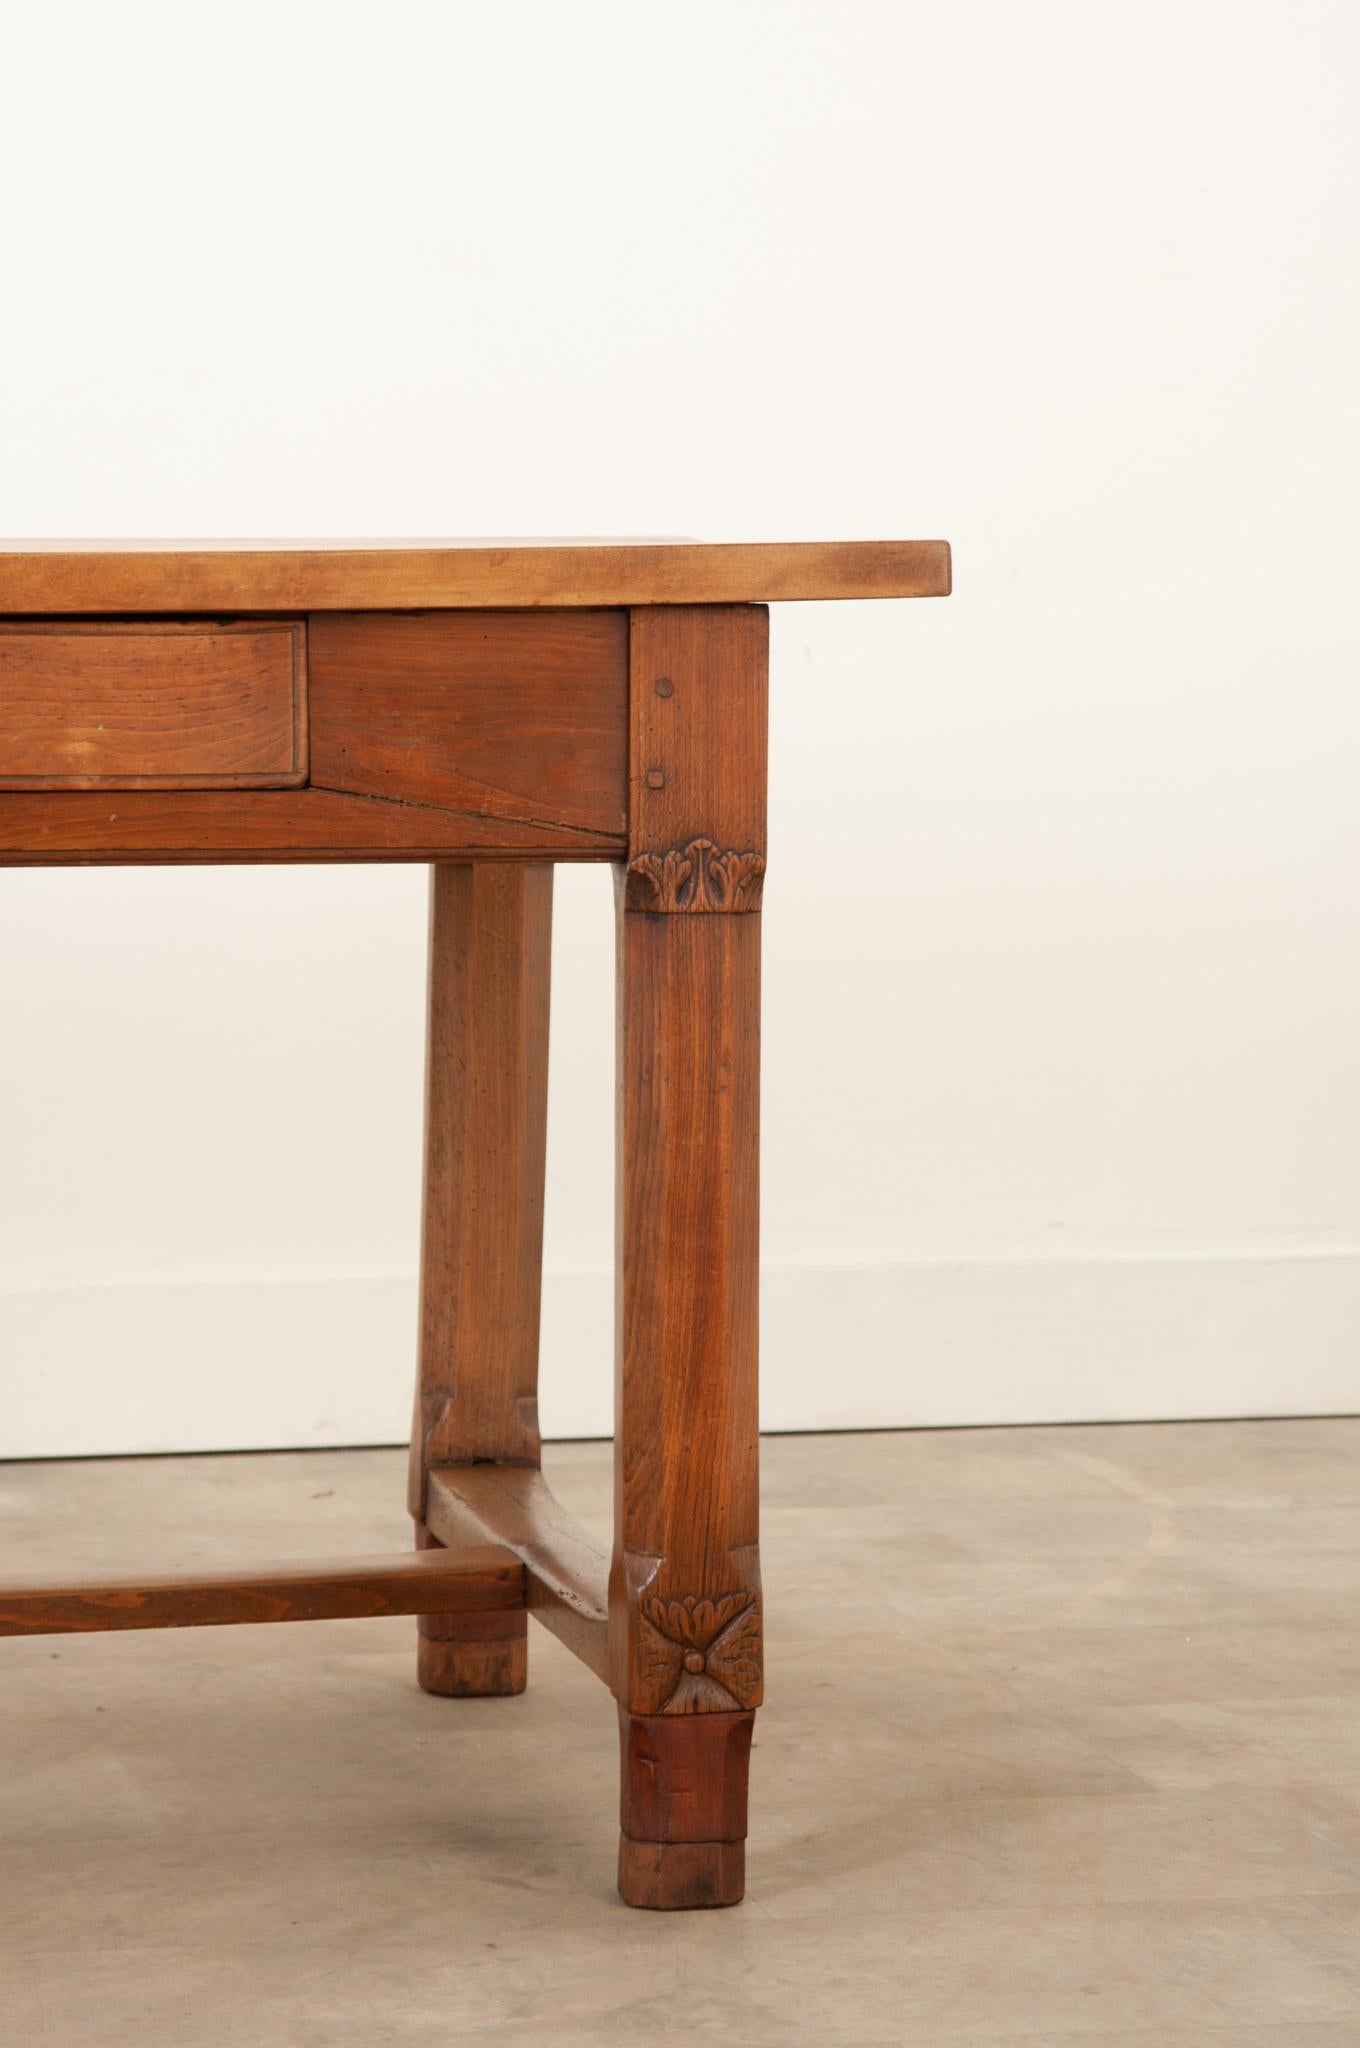 French 19th Century Oak Farm Table In Good Condition For Sale In Baton Rouge, LA